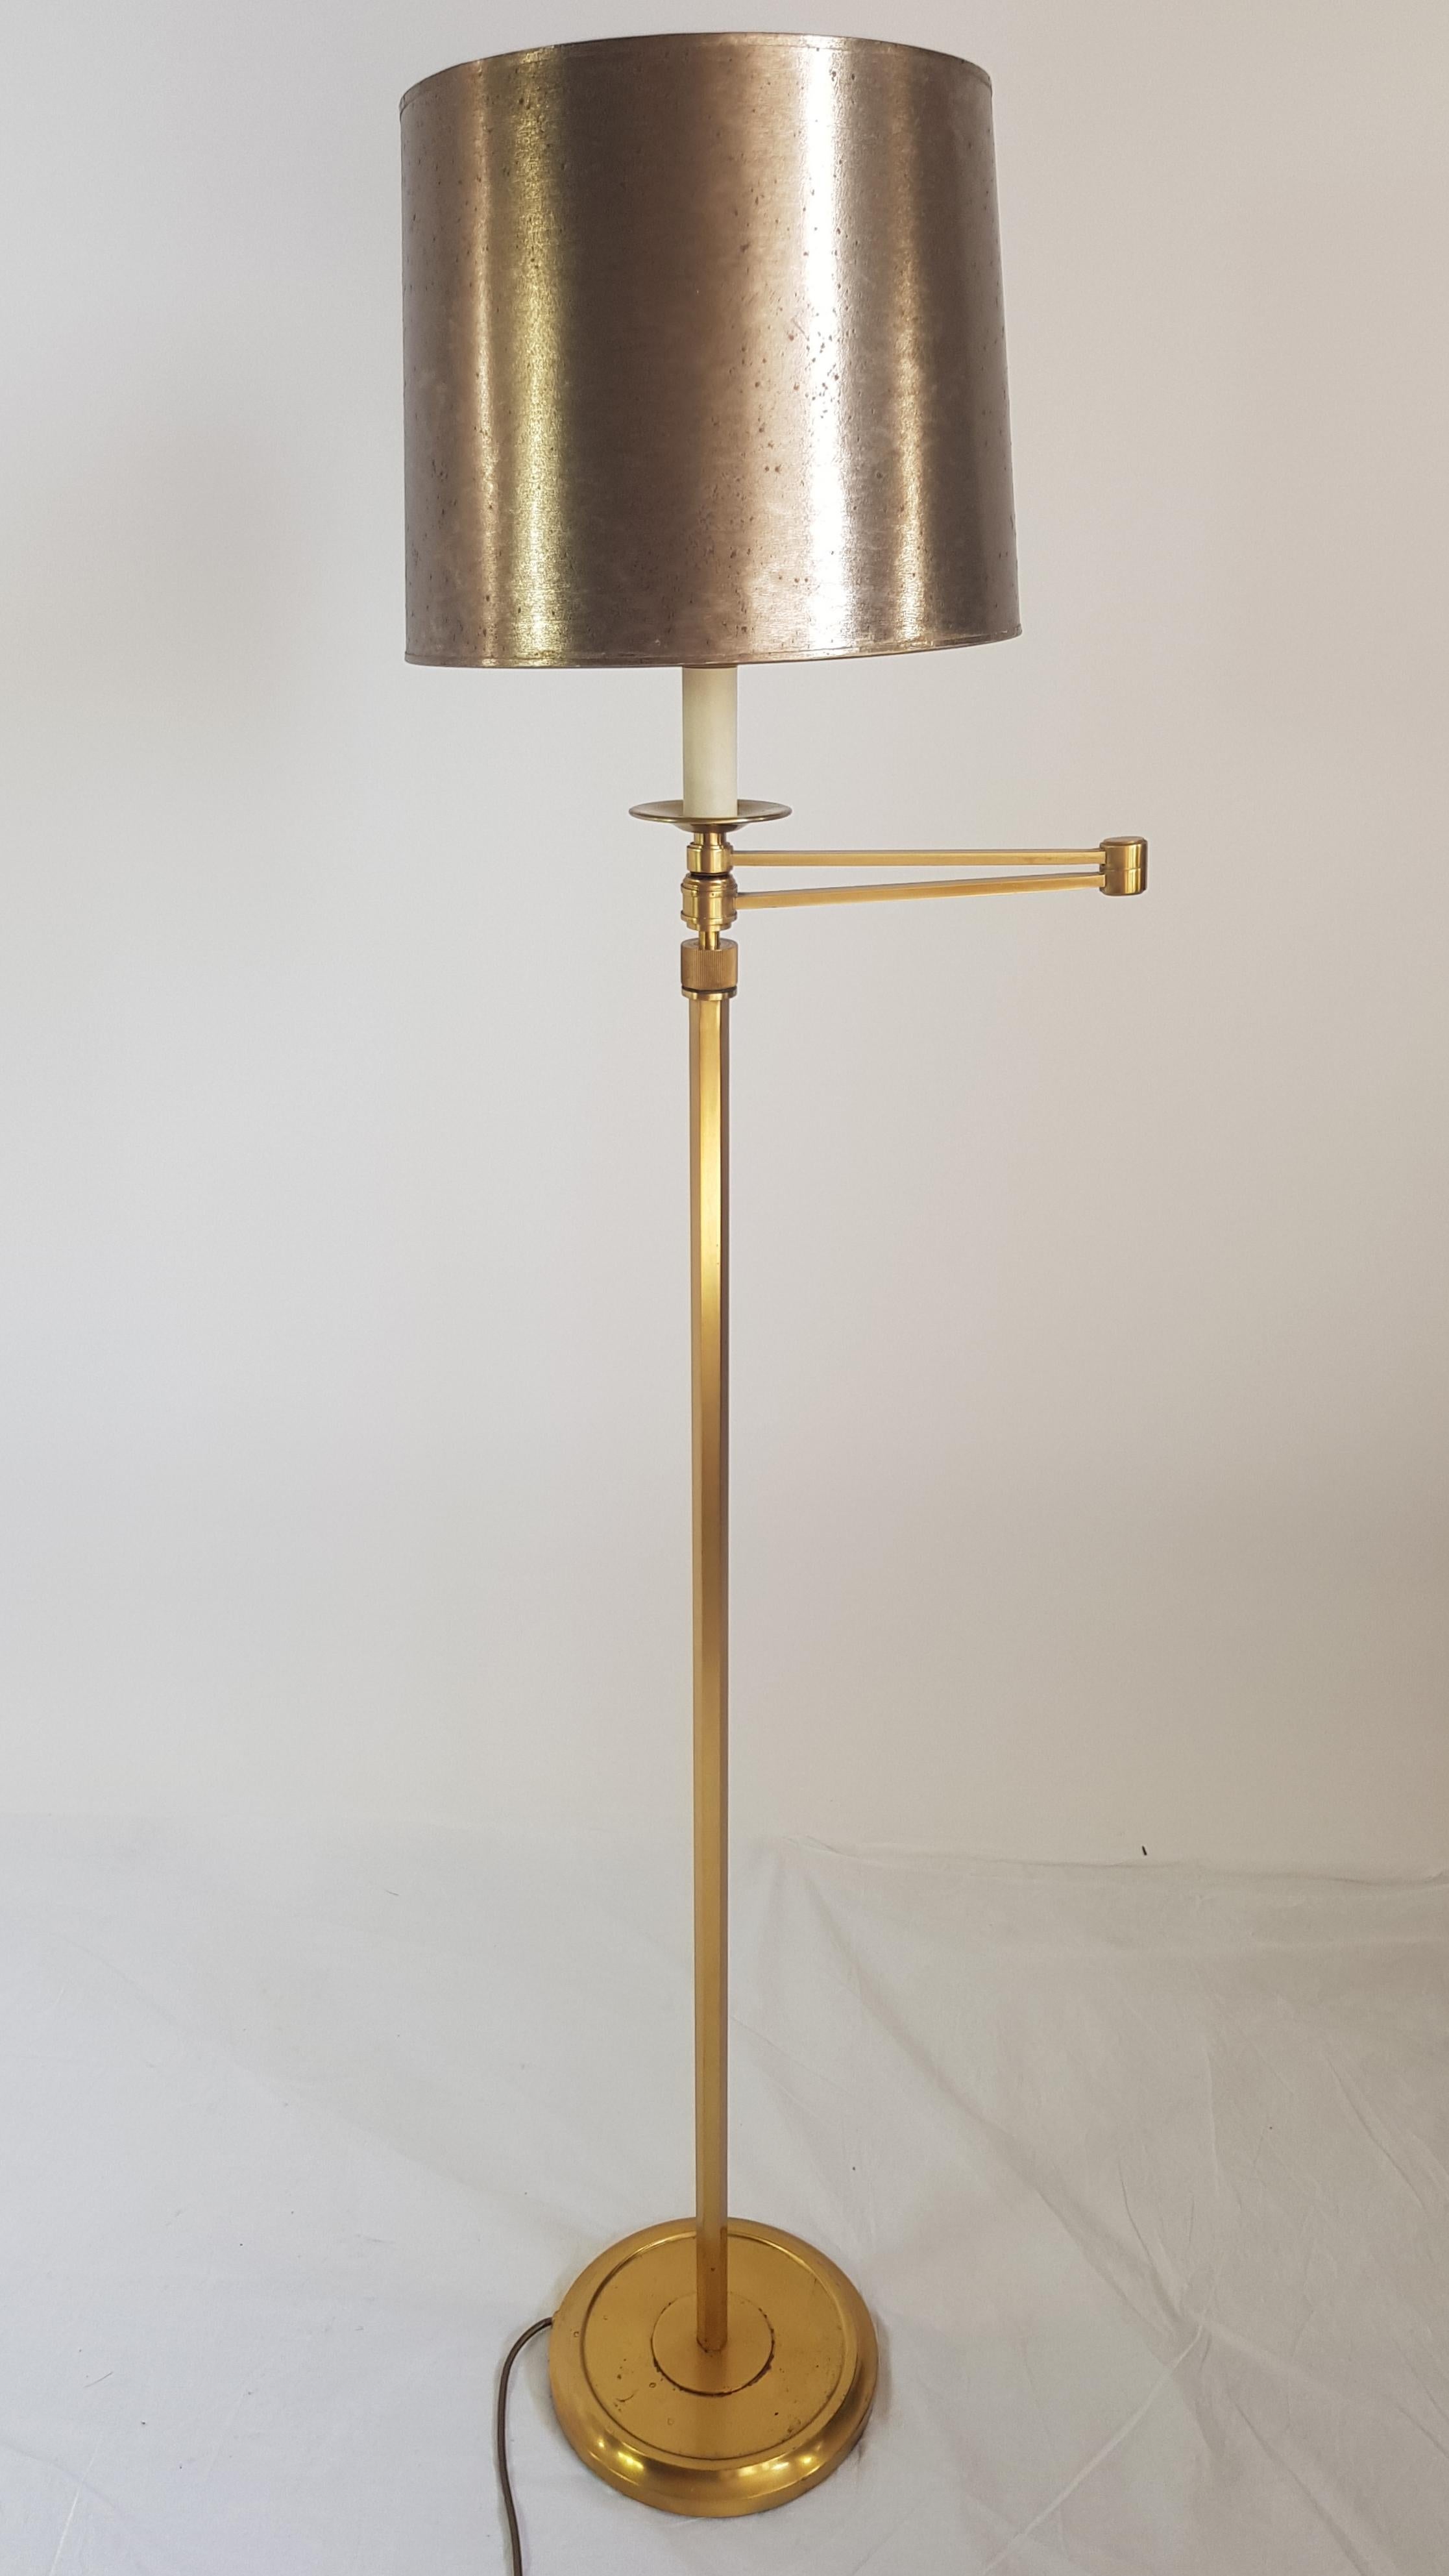 French, Bronze Floor Lamp, Liseuse Maison Bagès, Golden Lampshade, 1970s For Sale 1